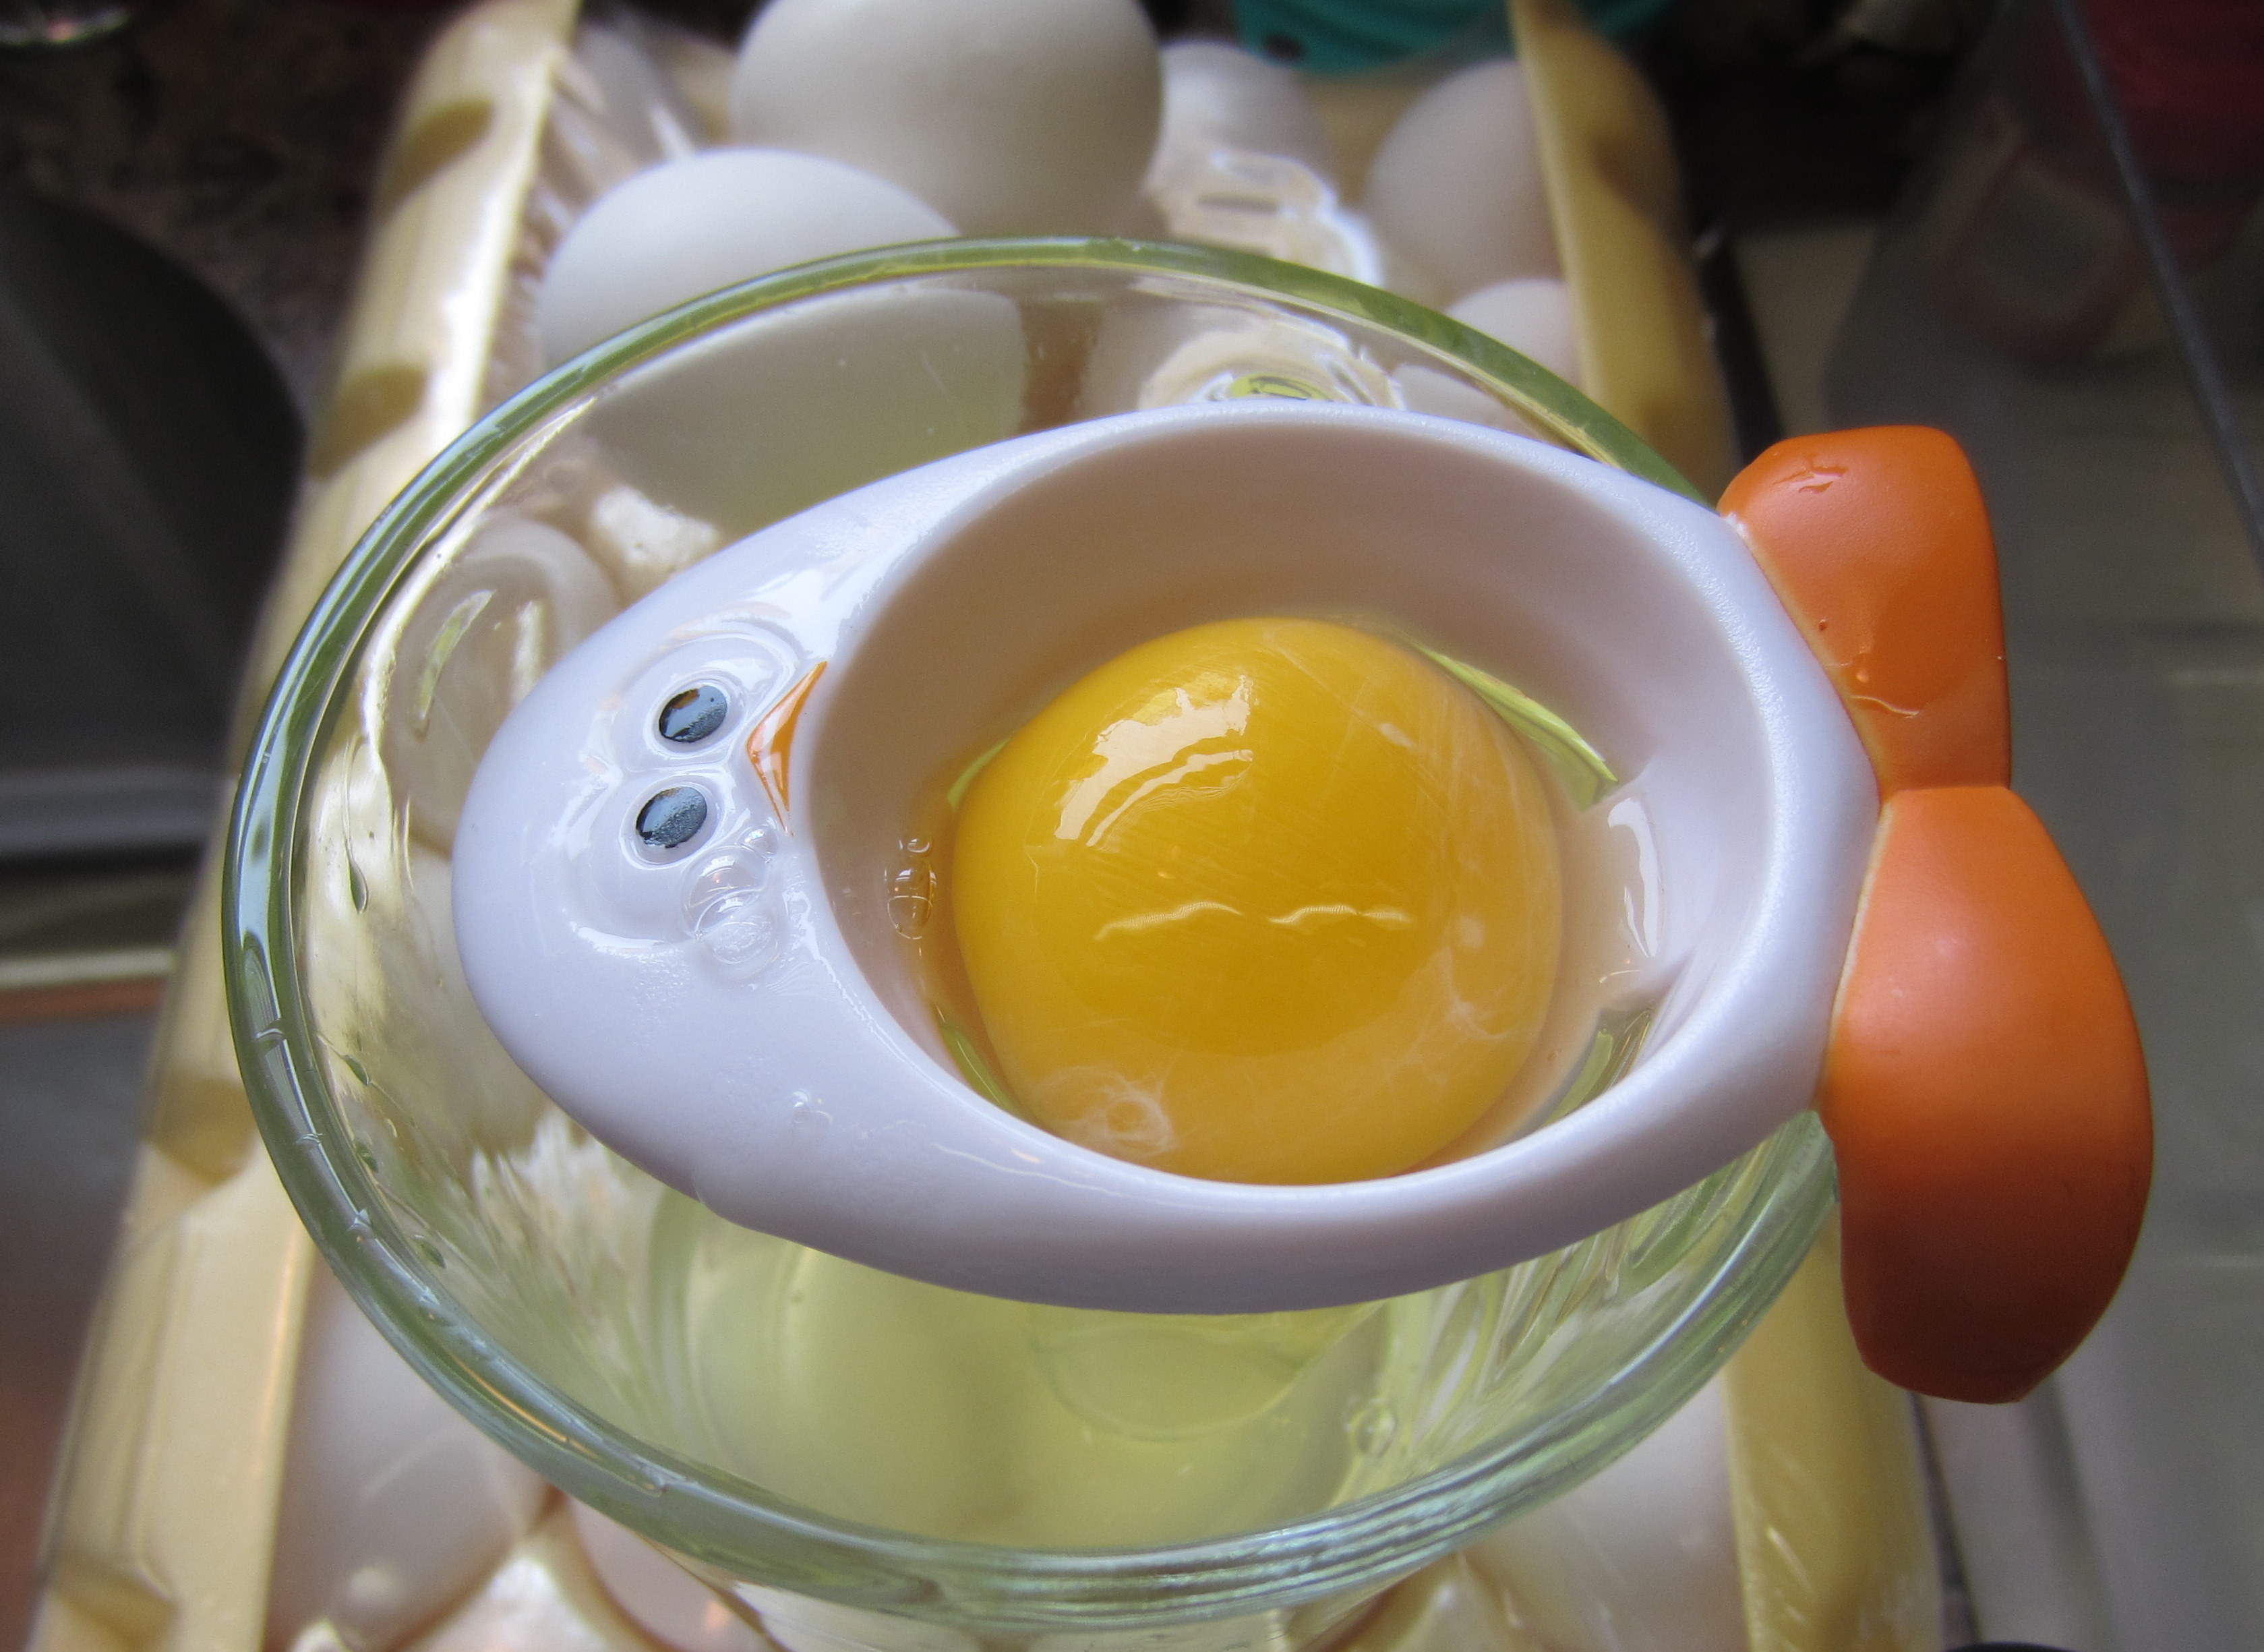 1. Always crack the eggs into a separate